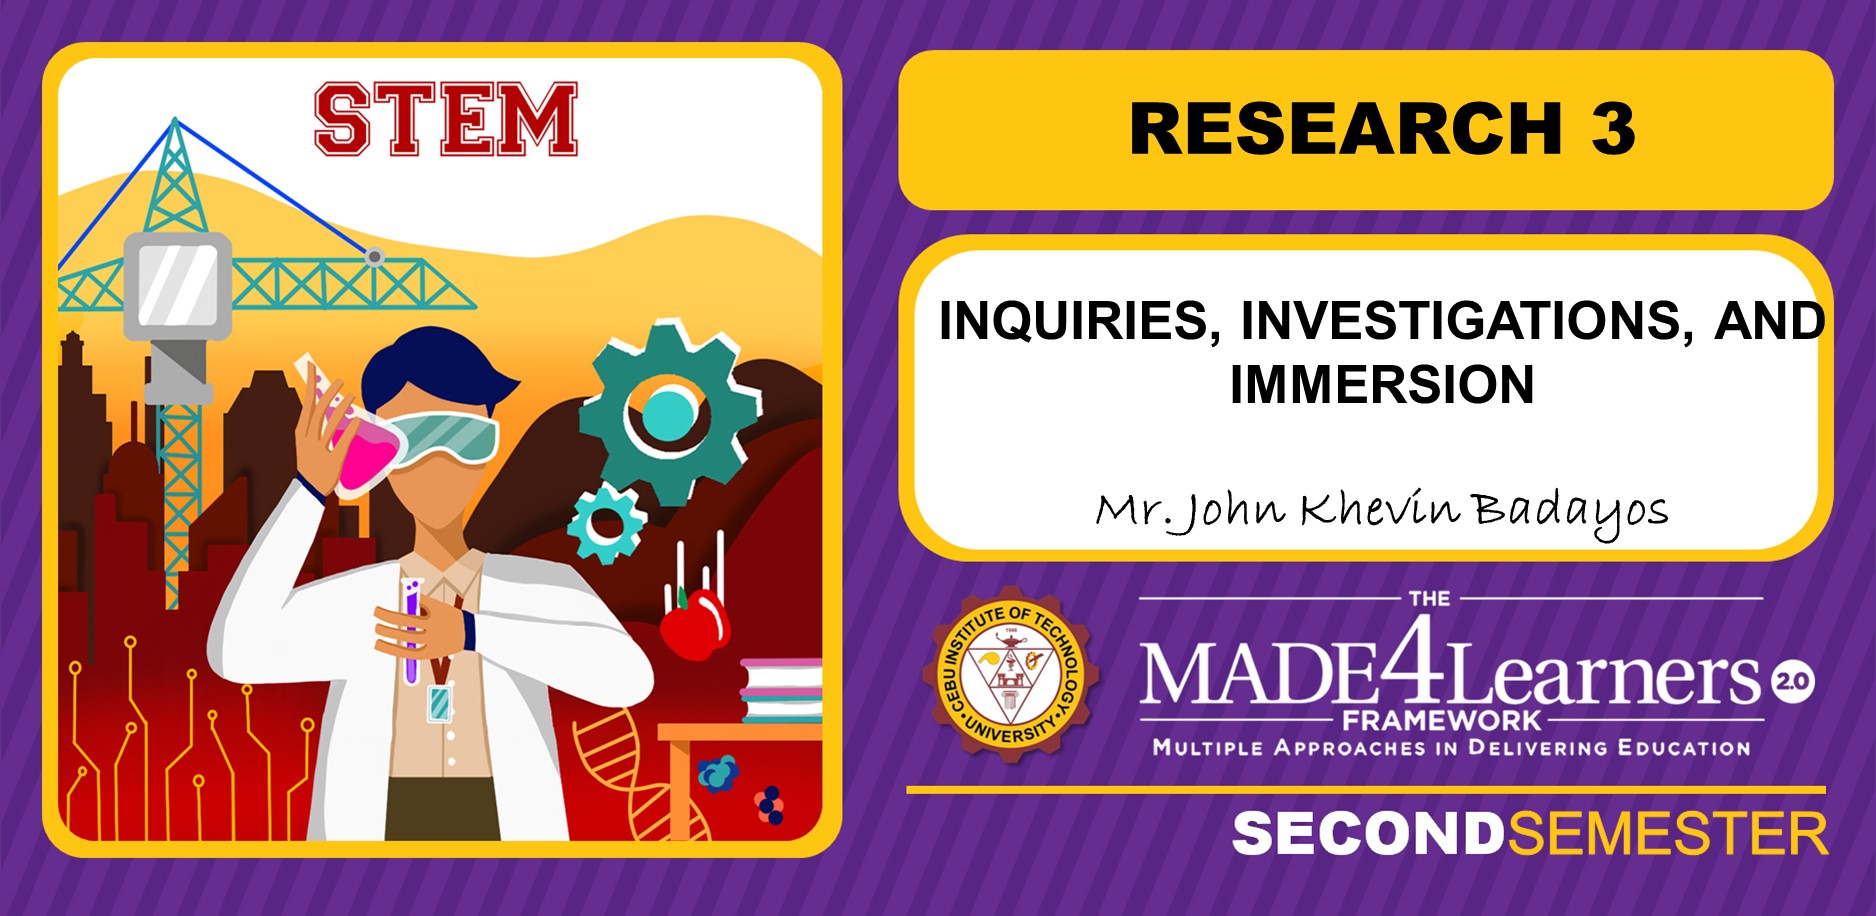 RES3: Research Inquiries, Investigations and Immersions (Badayos)